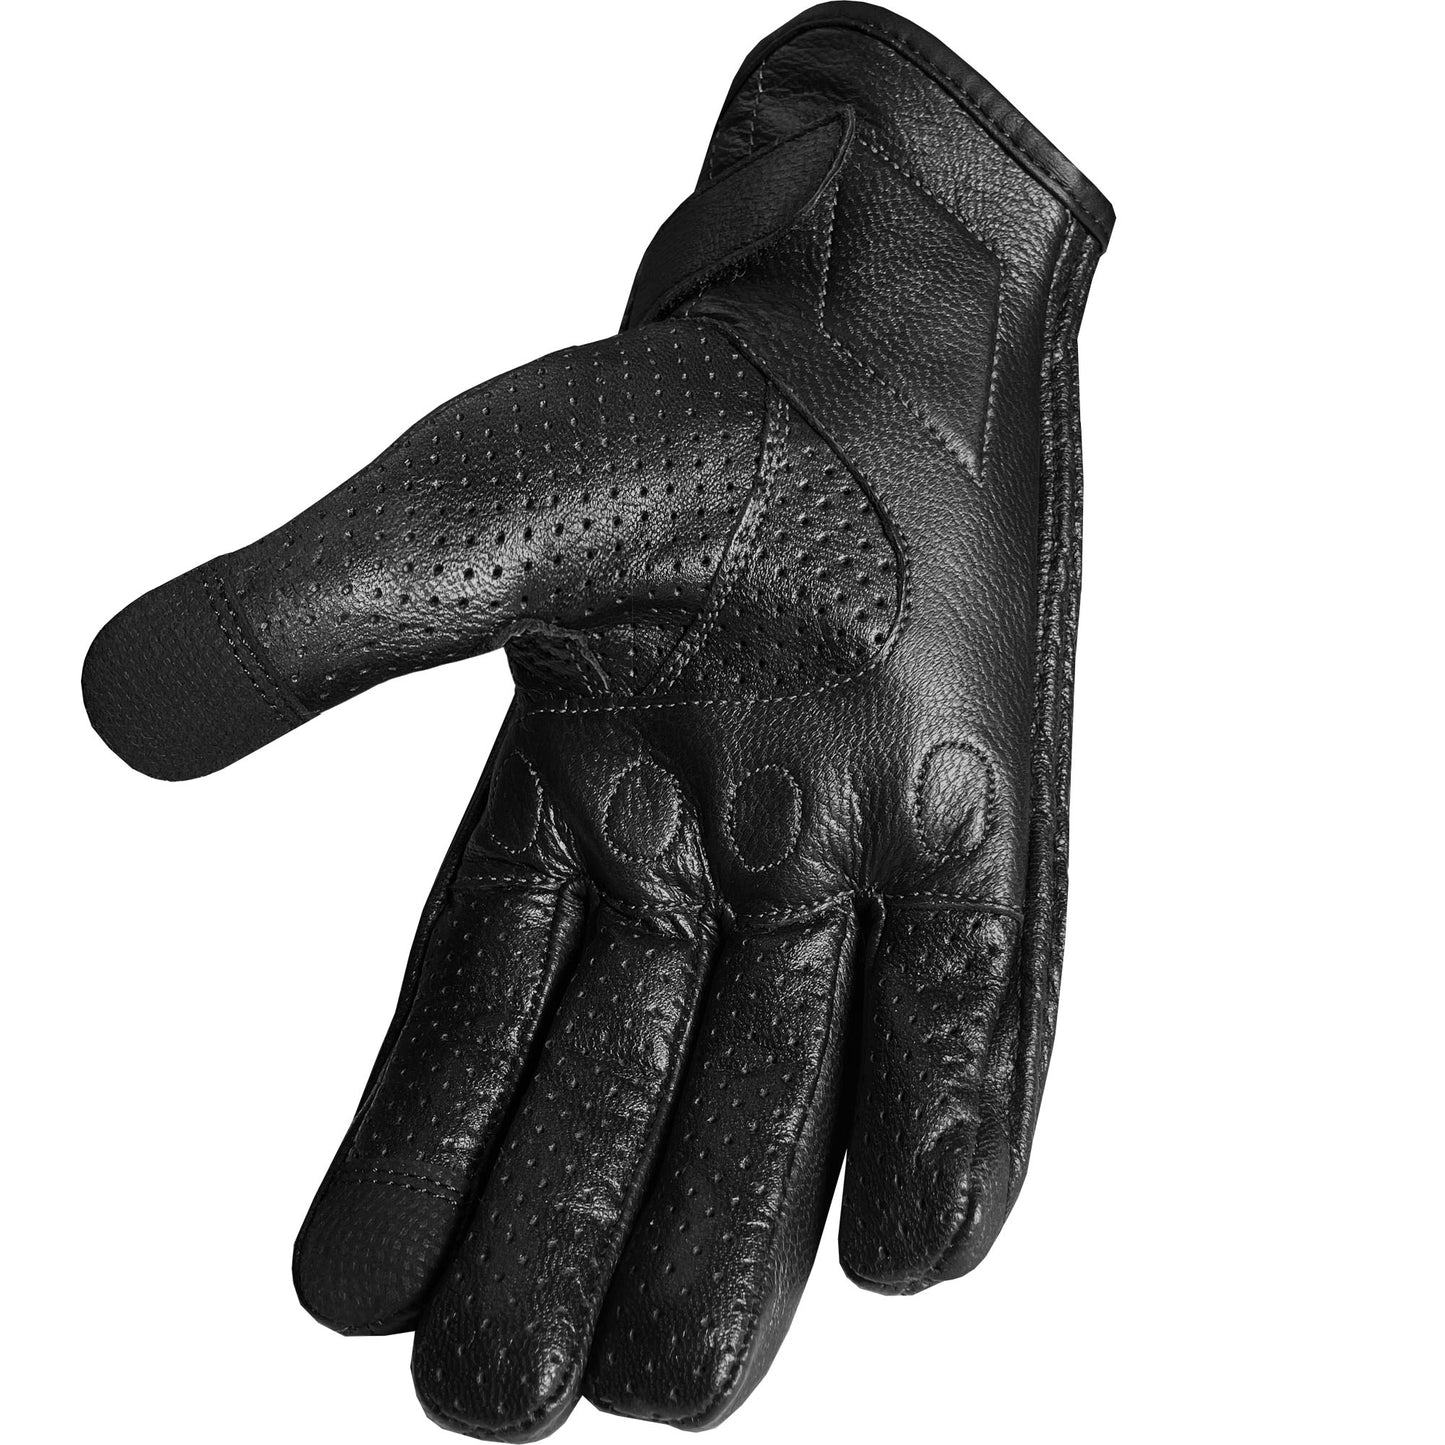 Motorcycle Bicycle Riding Racing Bike Protective Armor Gel Leather Gloves BlackWhite